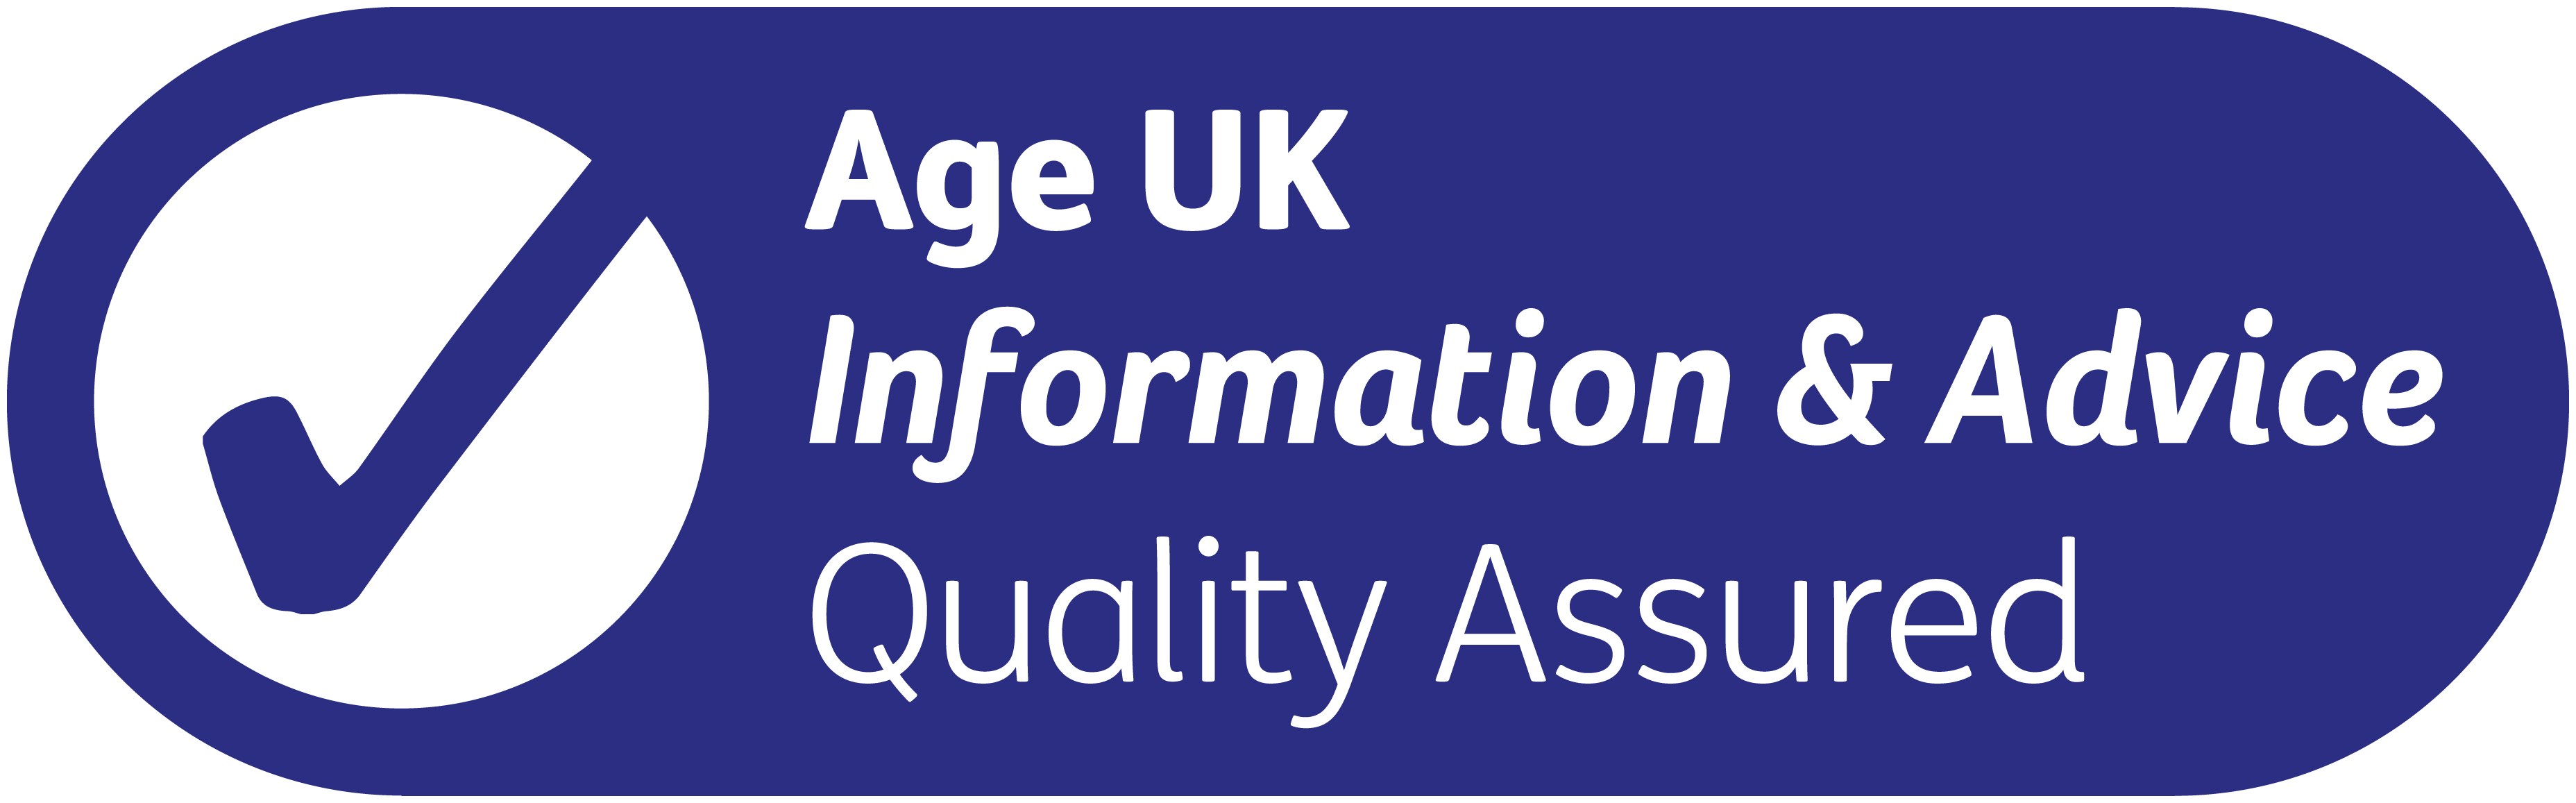 Age UK Information & Advice Quality Marque